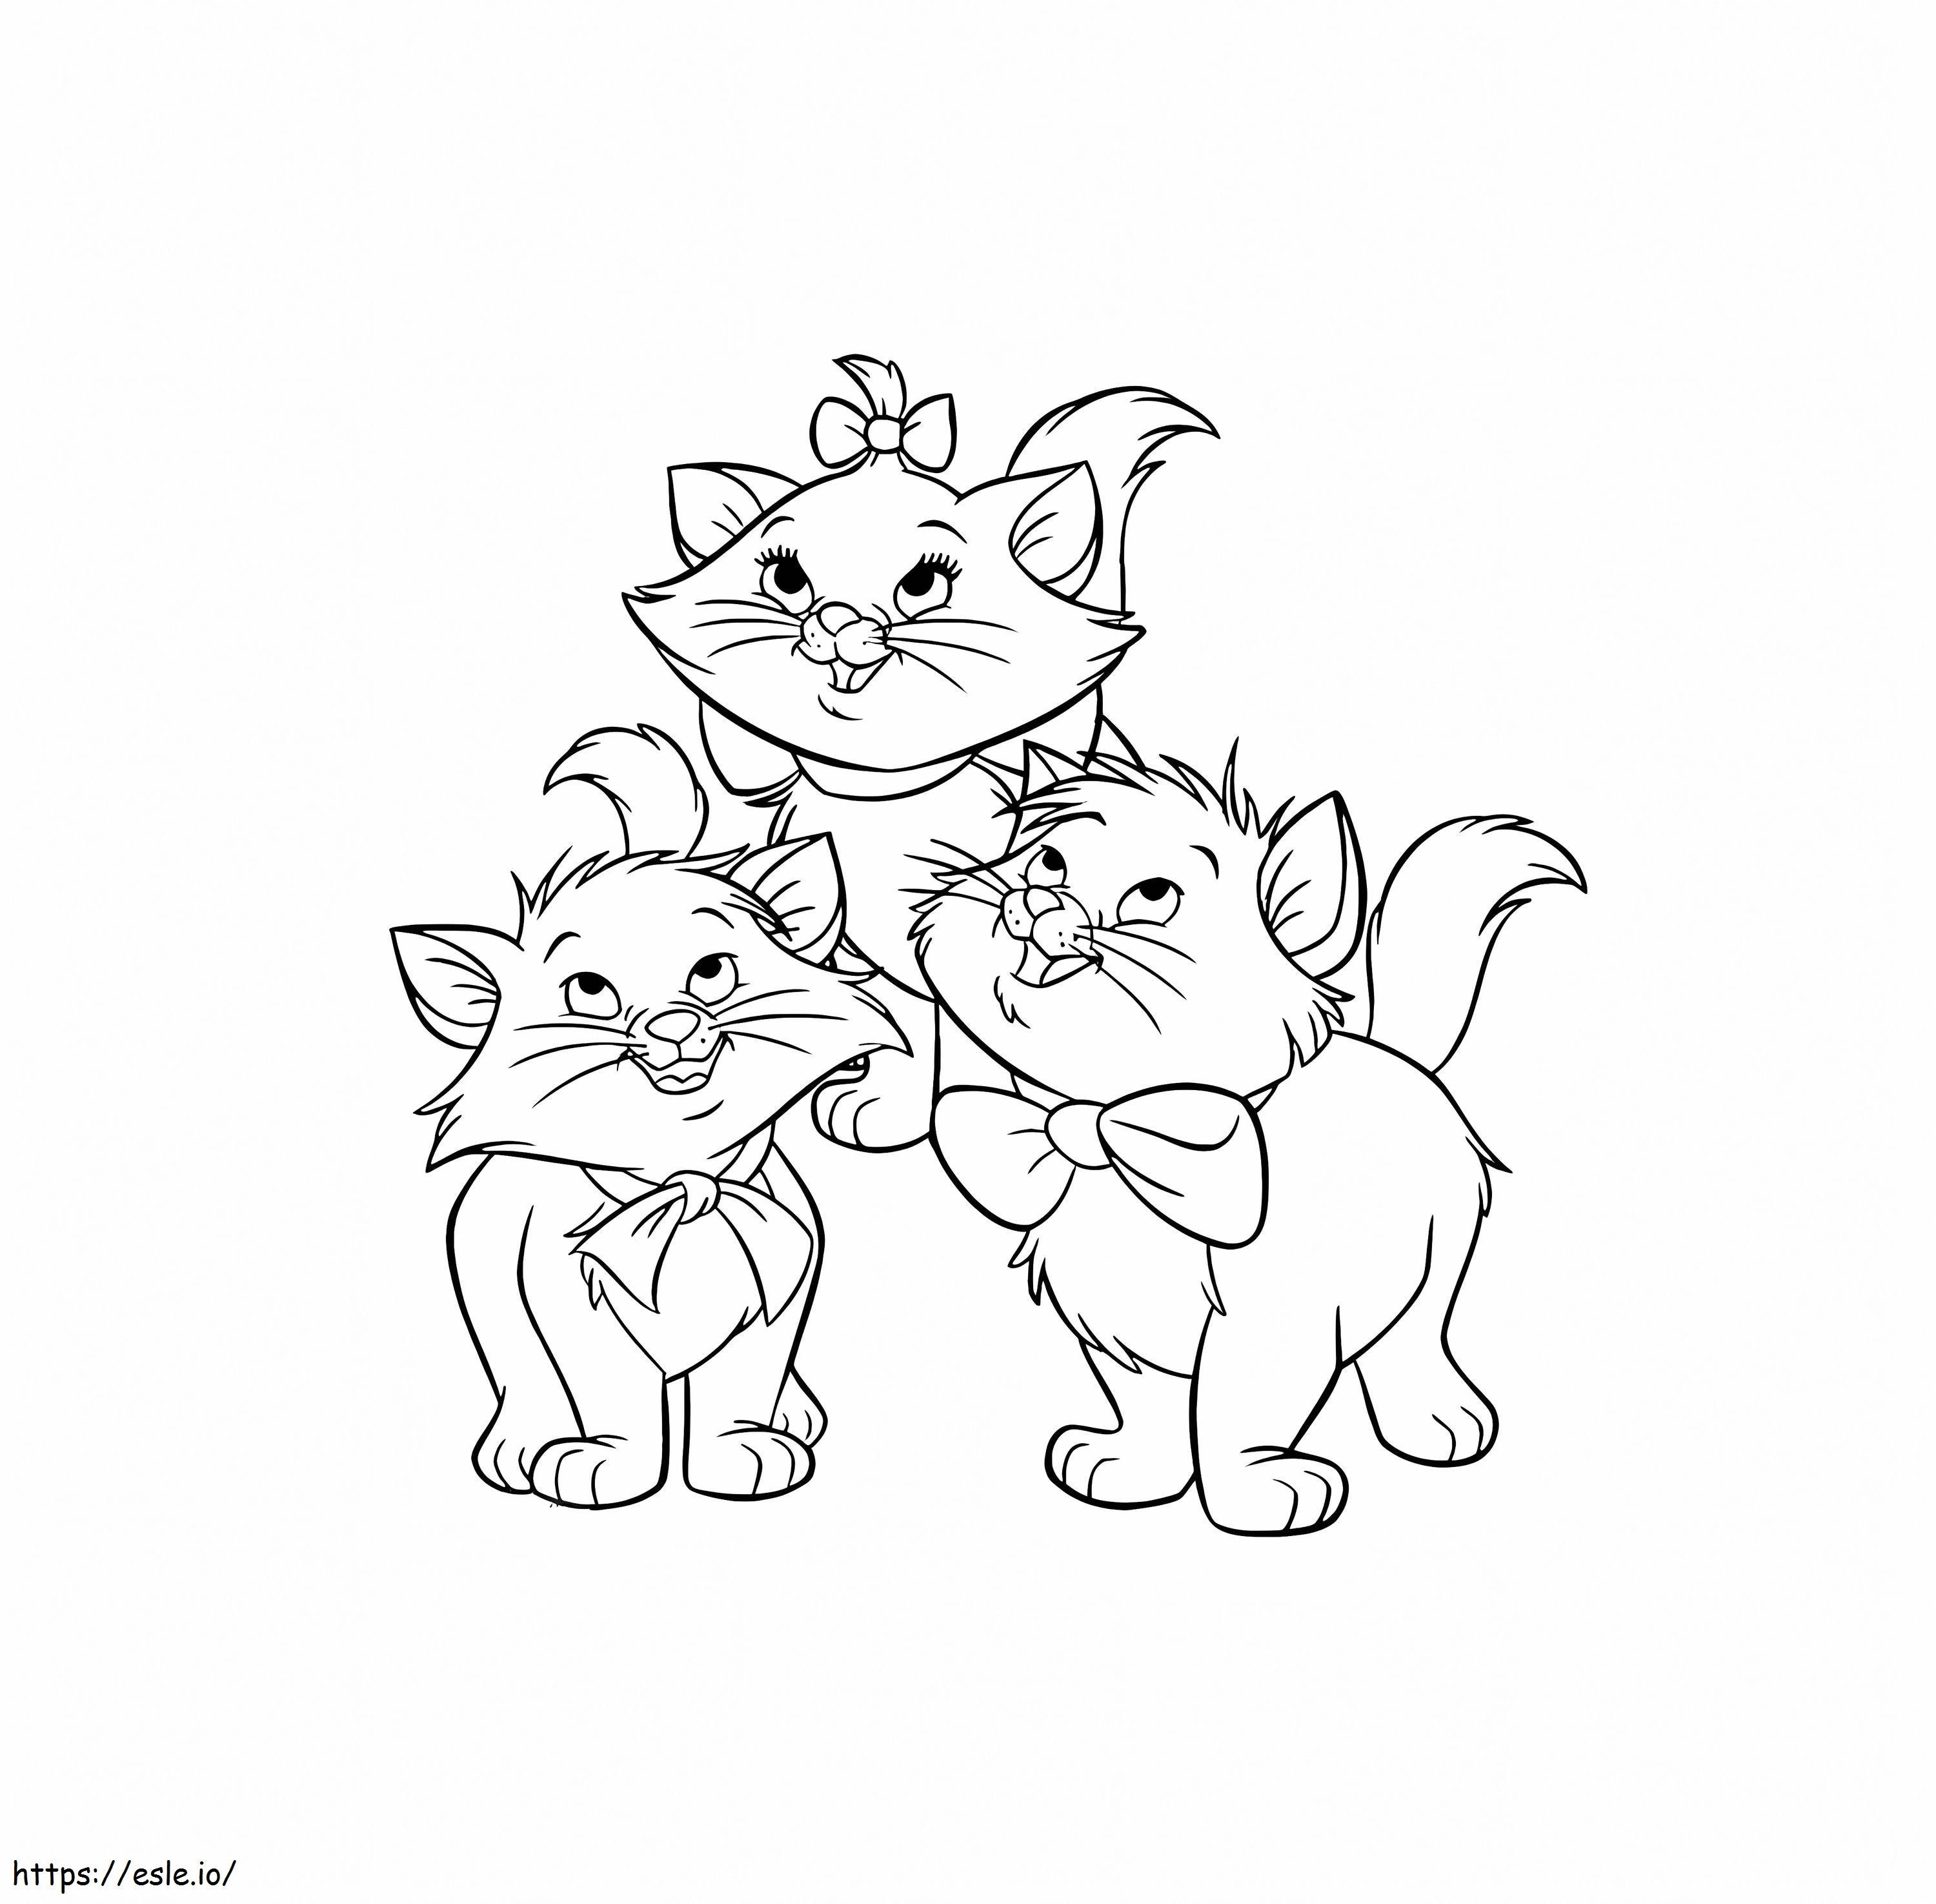 Disney Marie Cat Coloring Pages coloring page